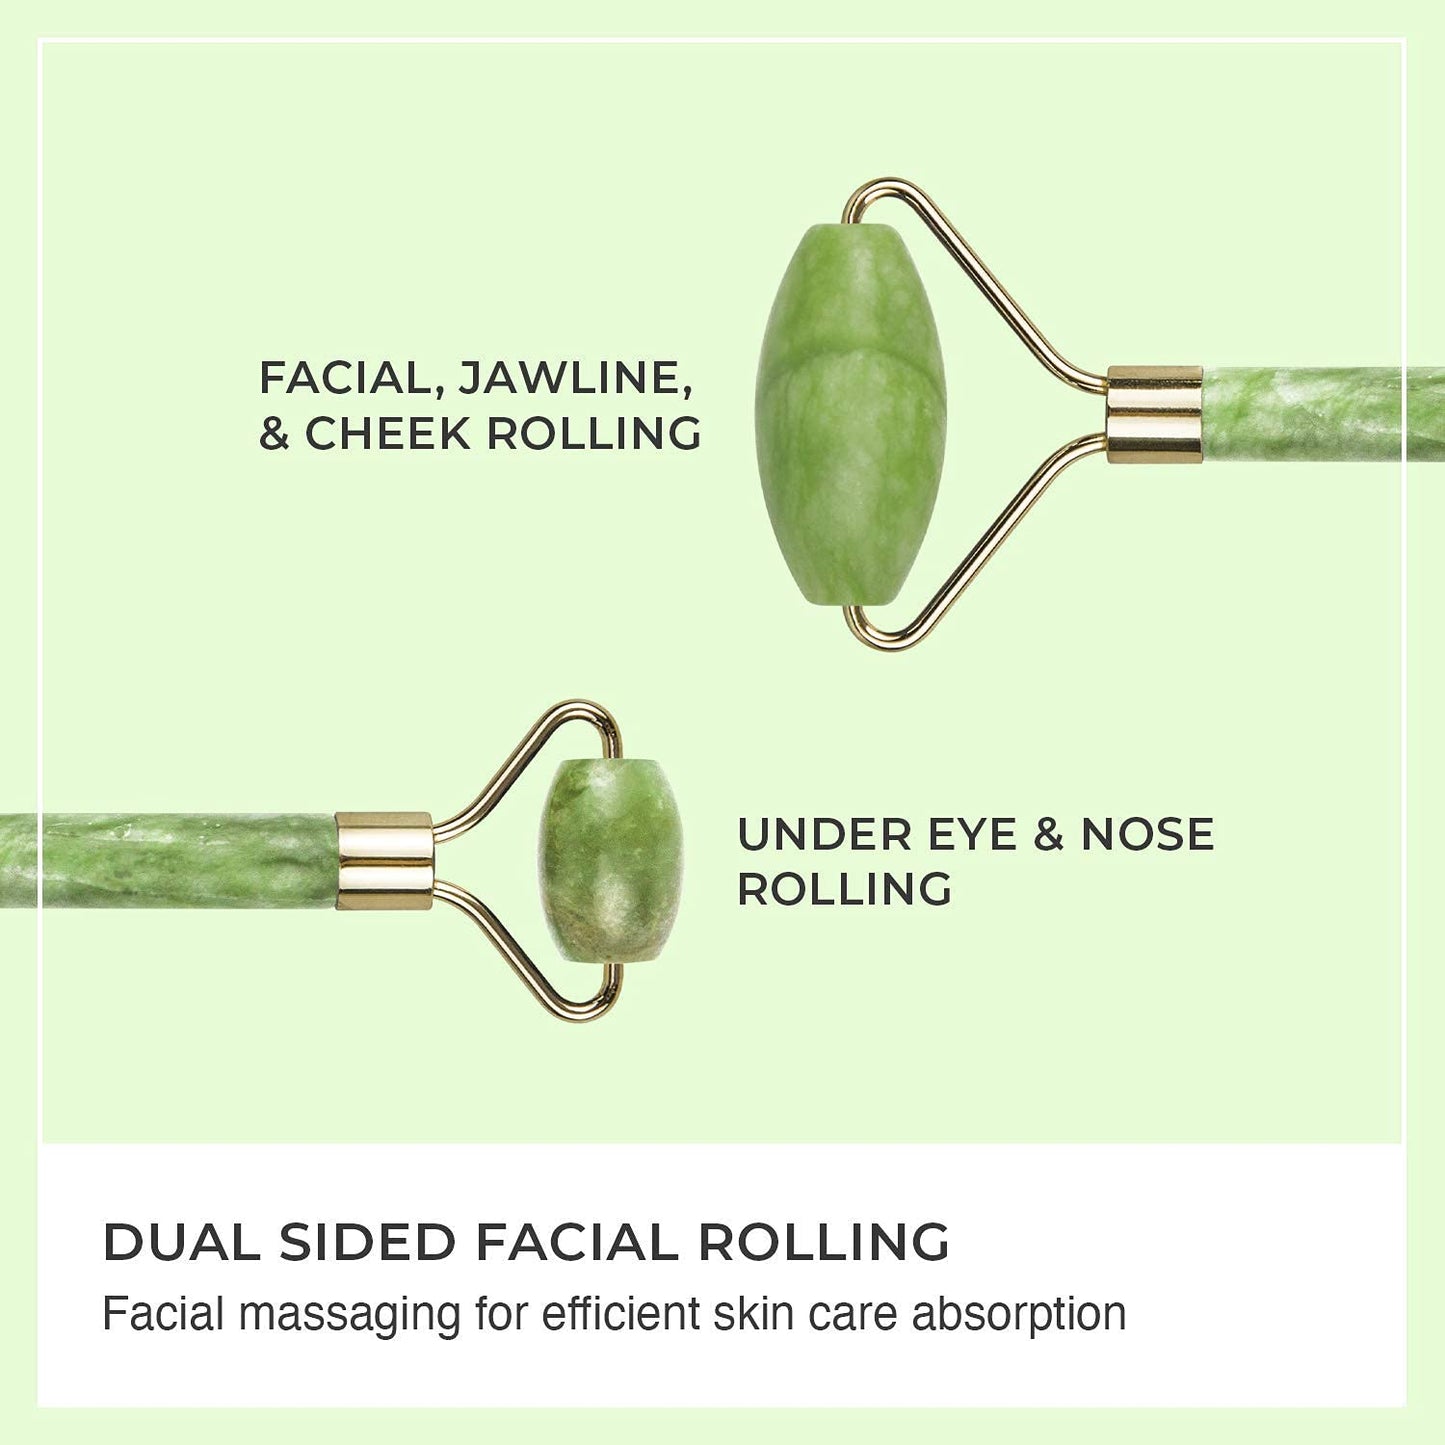 illustration of the jade rollers wide end for facial, jawline, and cheek. the narrow end for under eye and nose